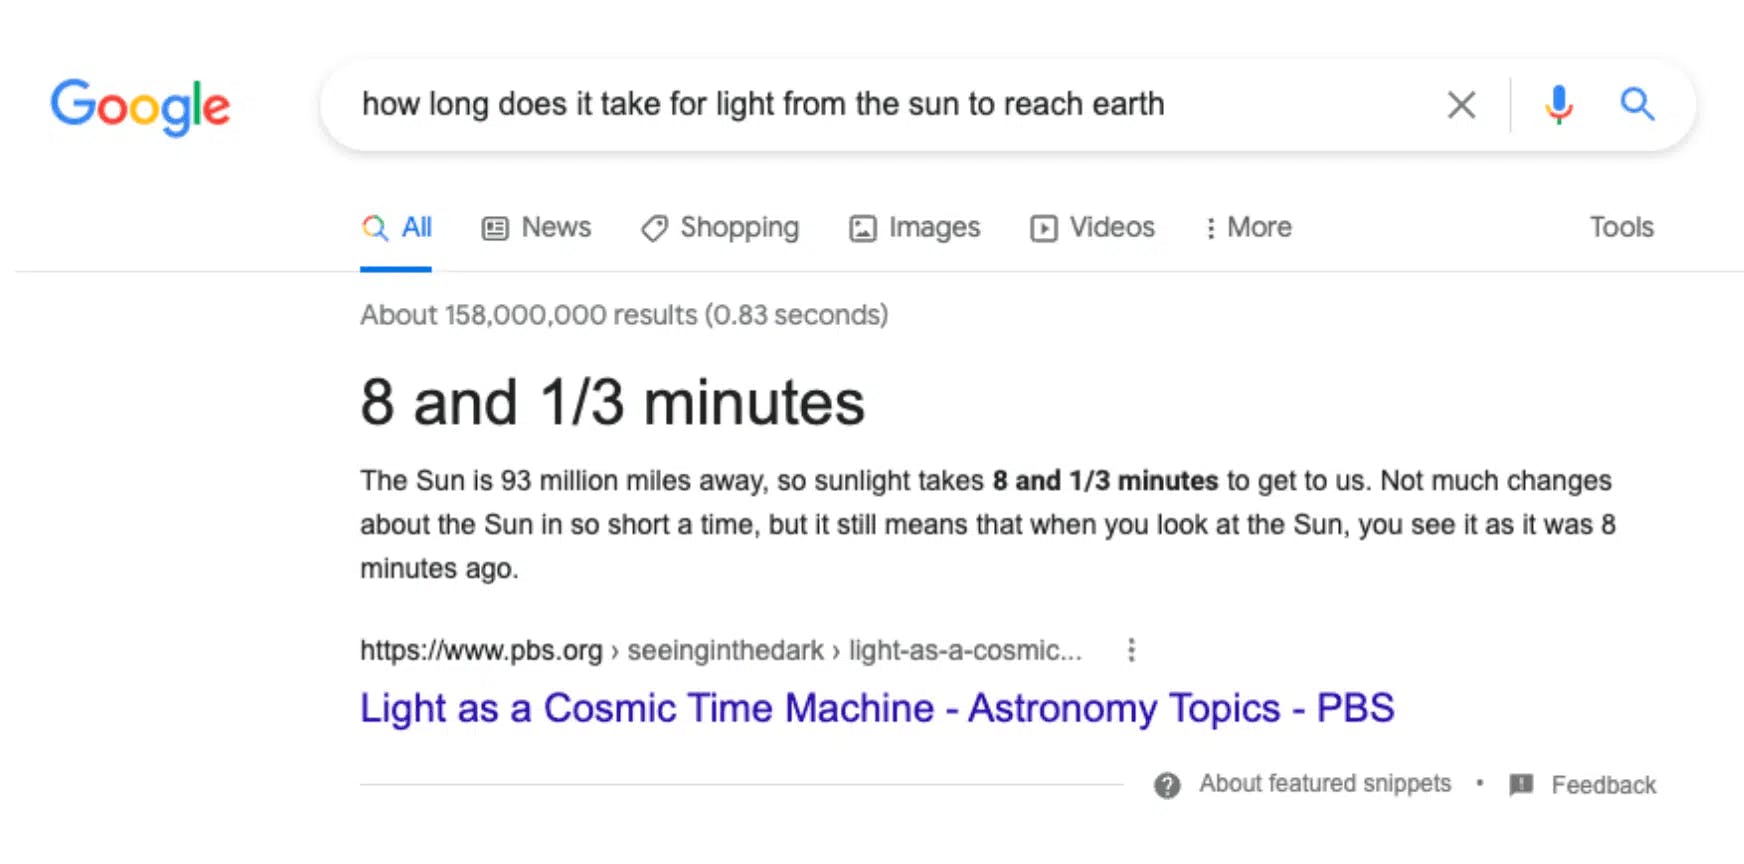 Featured snippet for search: how long does it take for light from the sun to reach earth. Answer: 8 and 1/3 minutes.